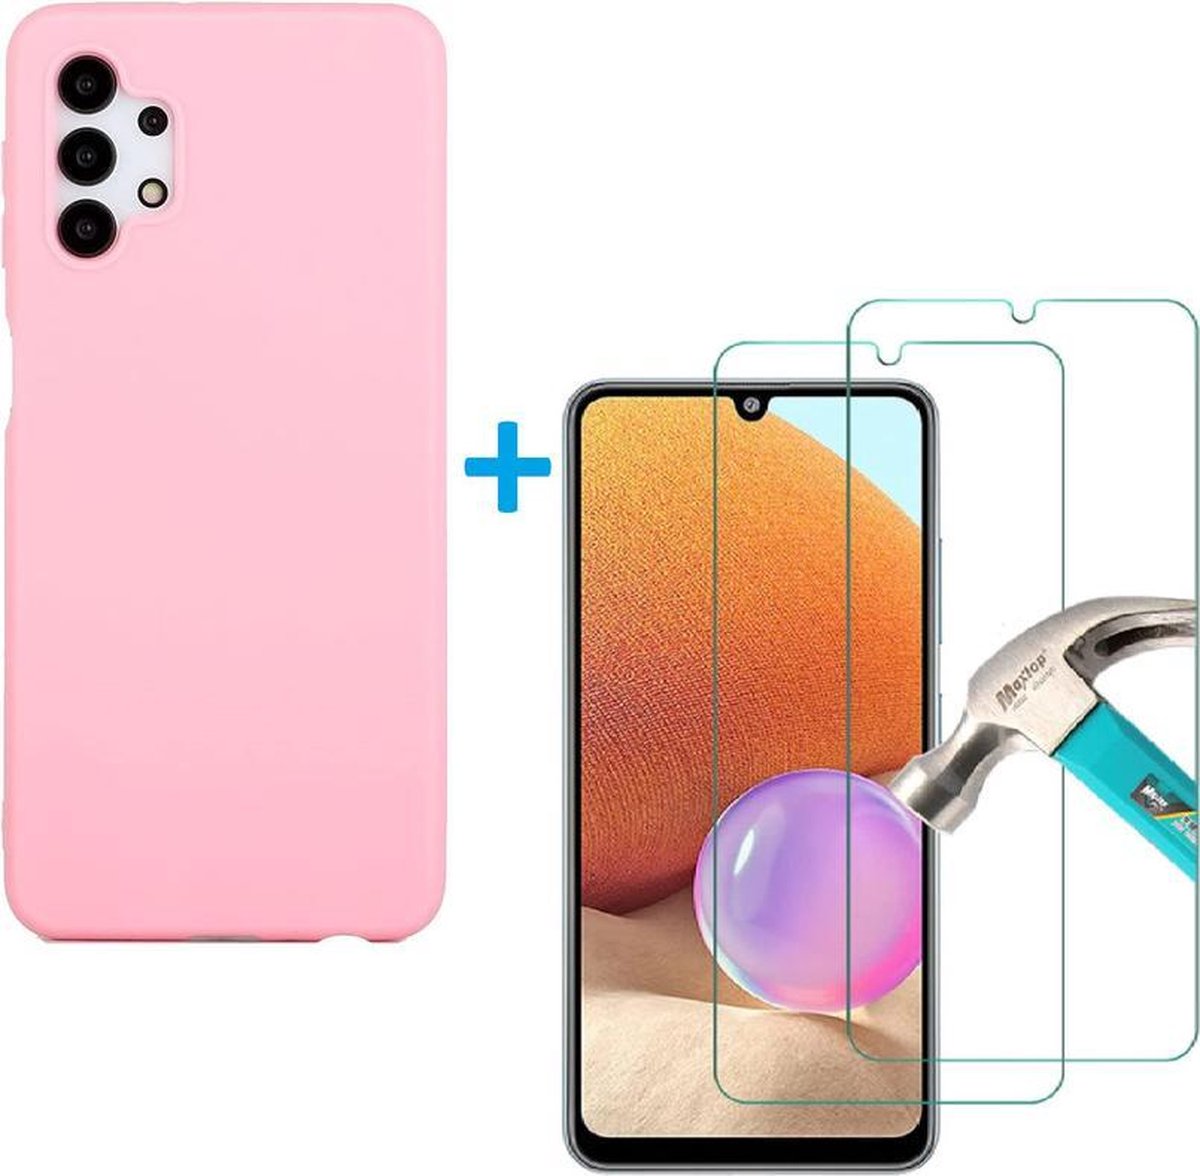 Solid hoesje Geschikt voor: Samsung Galaxy A32 5G Soft Touch Liquid Silicone Flexible TPU Rubber - licht roze + 1X Screenprotector Tempered Glass